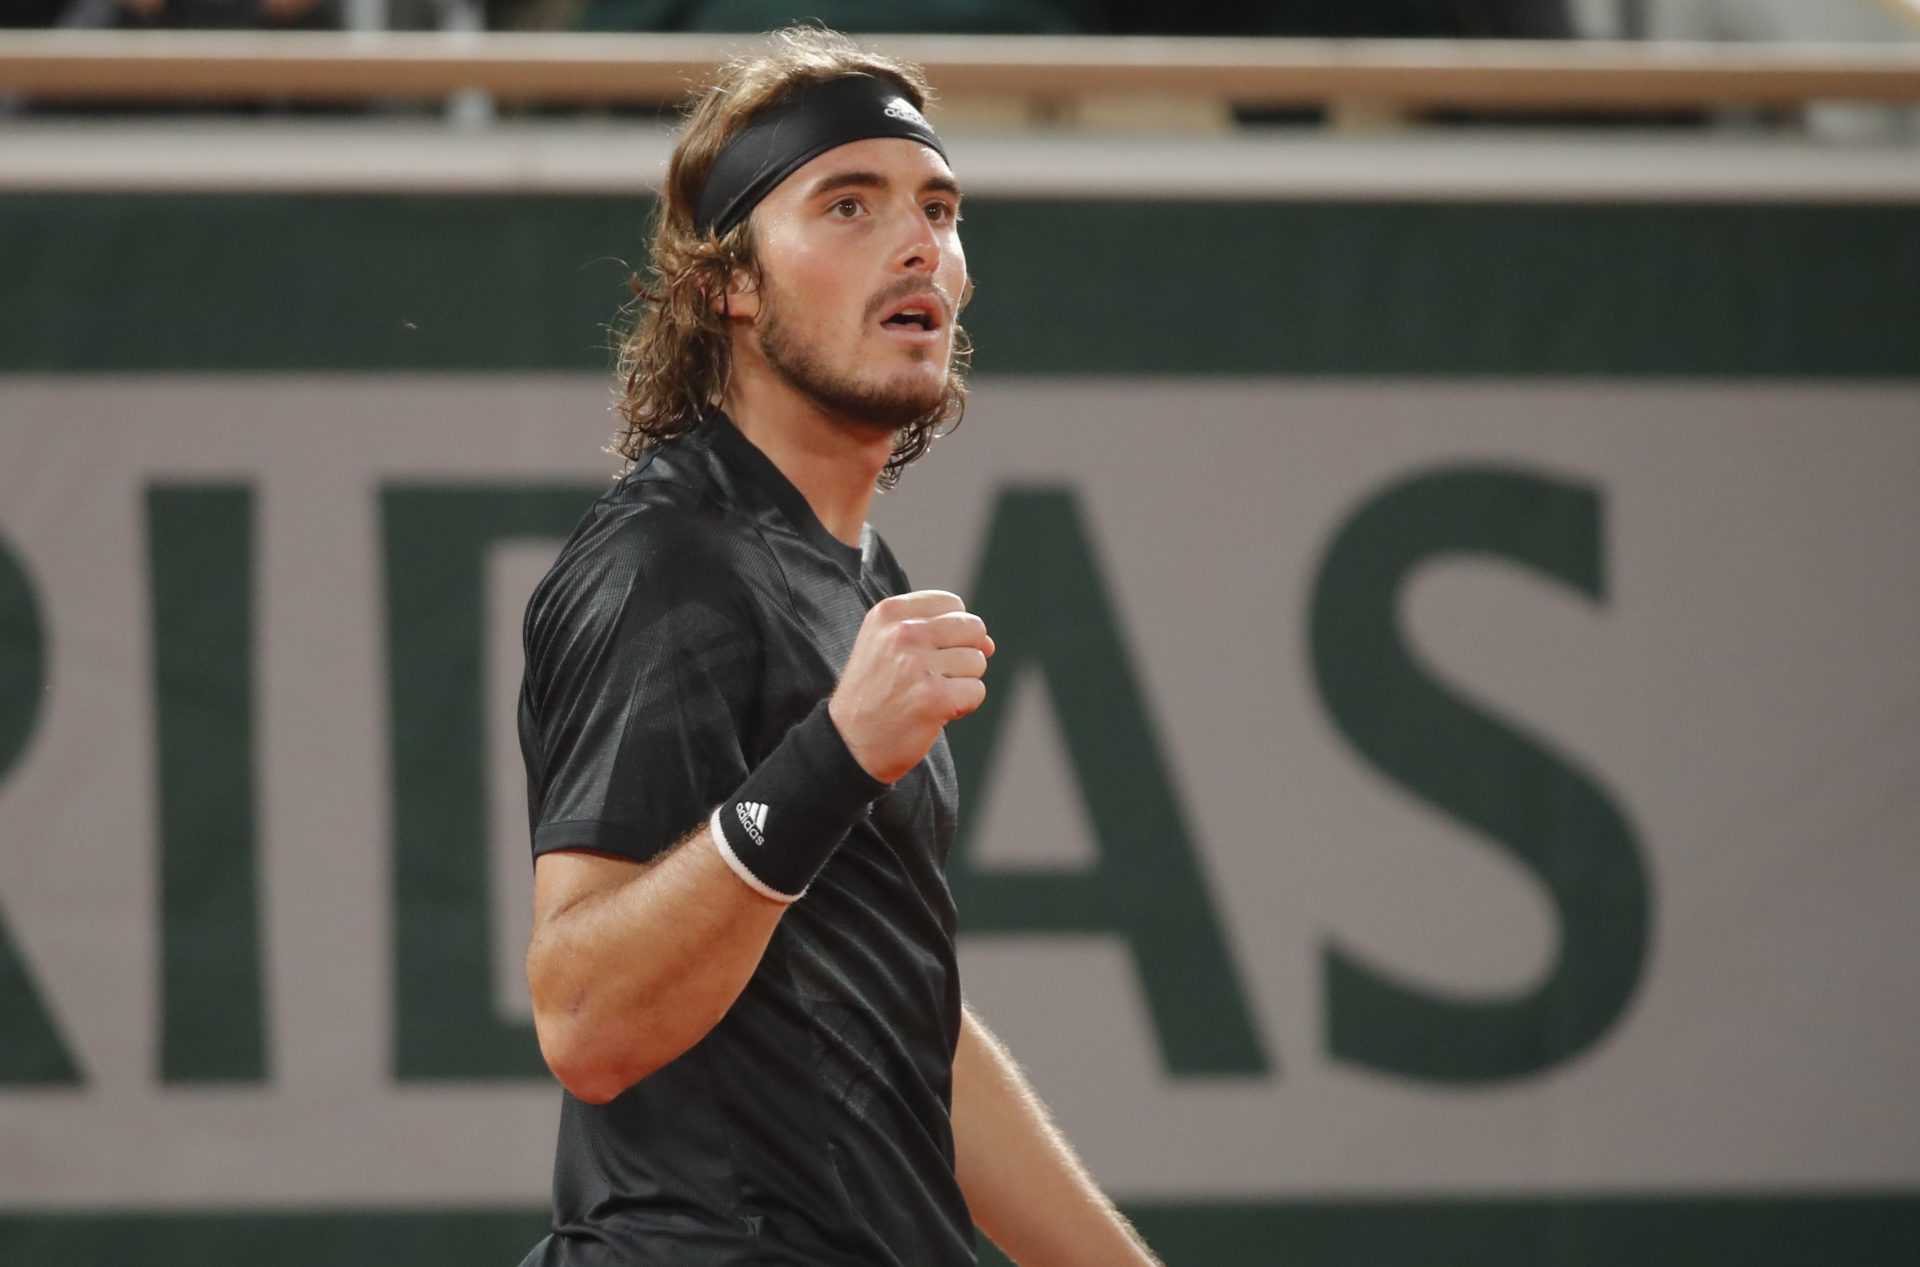 Stefanos Tsitsipas at the French Open 2020